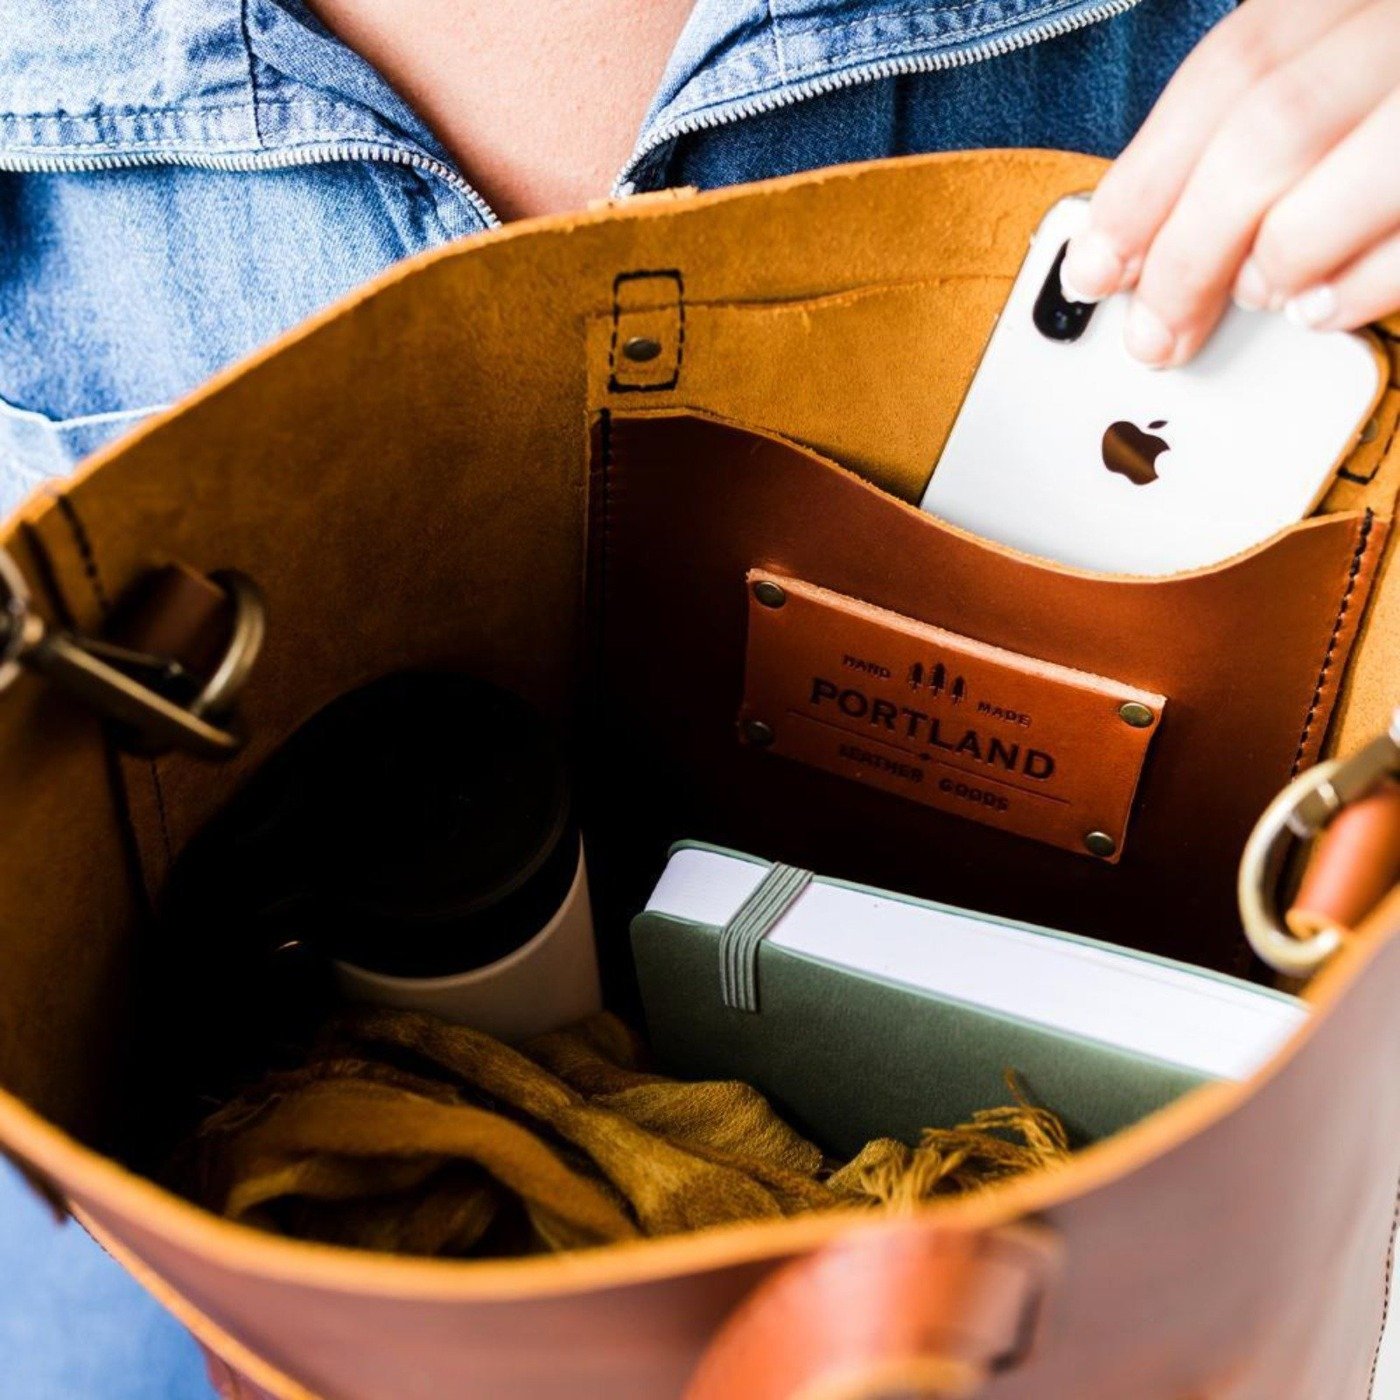 Leather Care & Tips  Portland Leather Goods